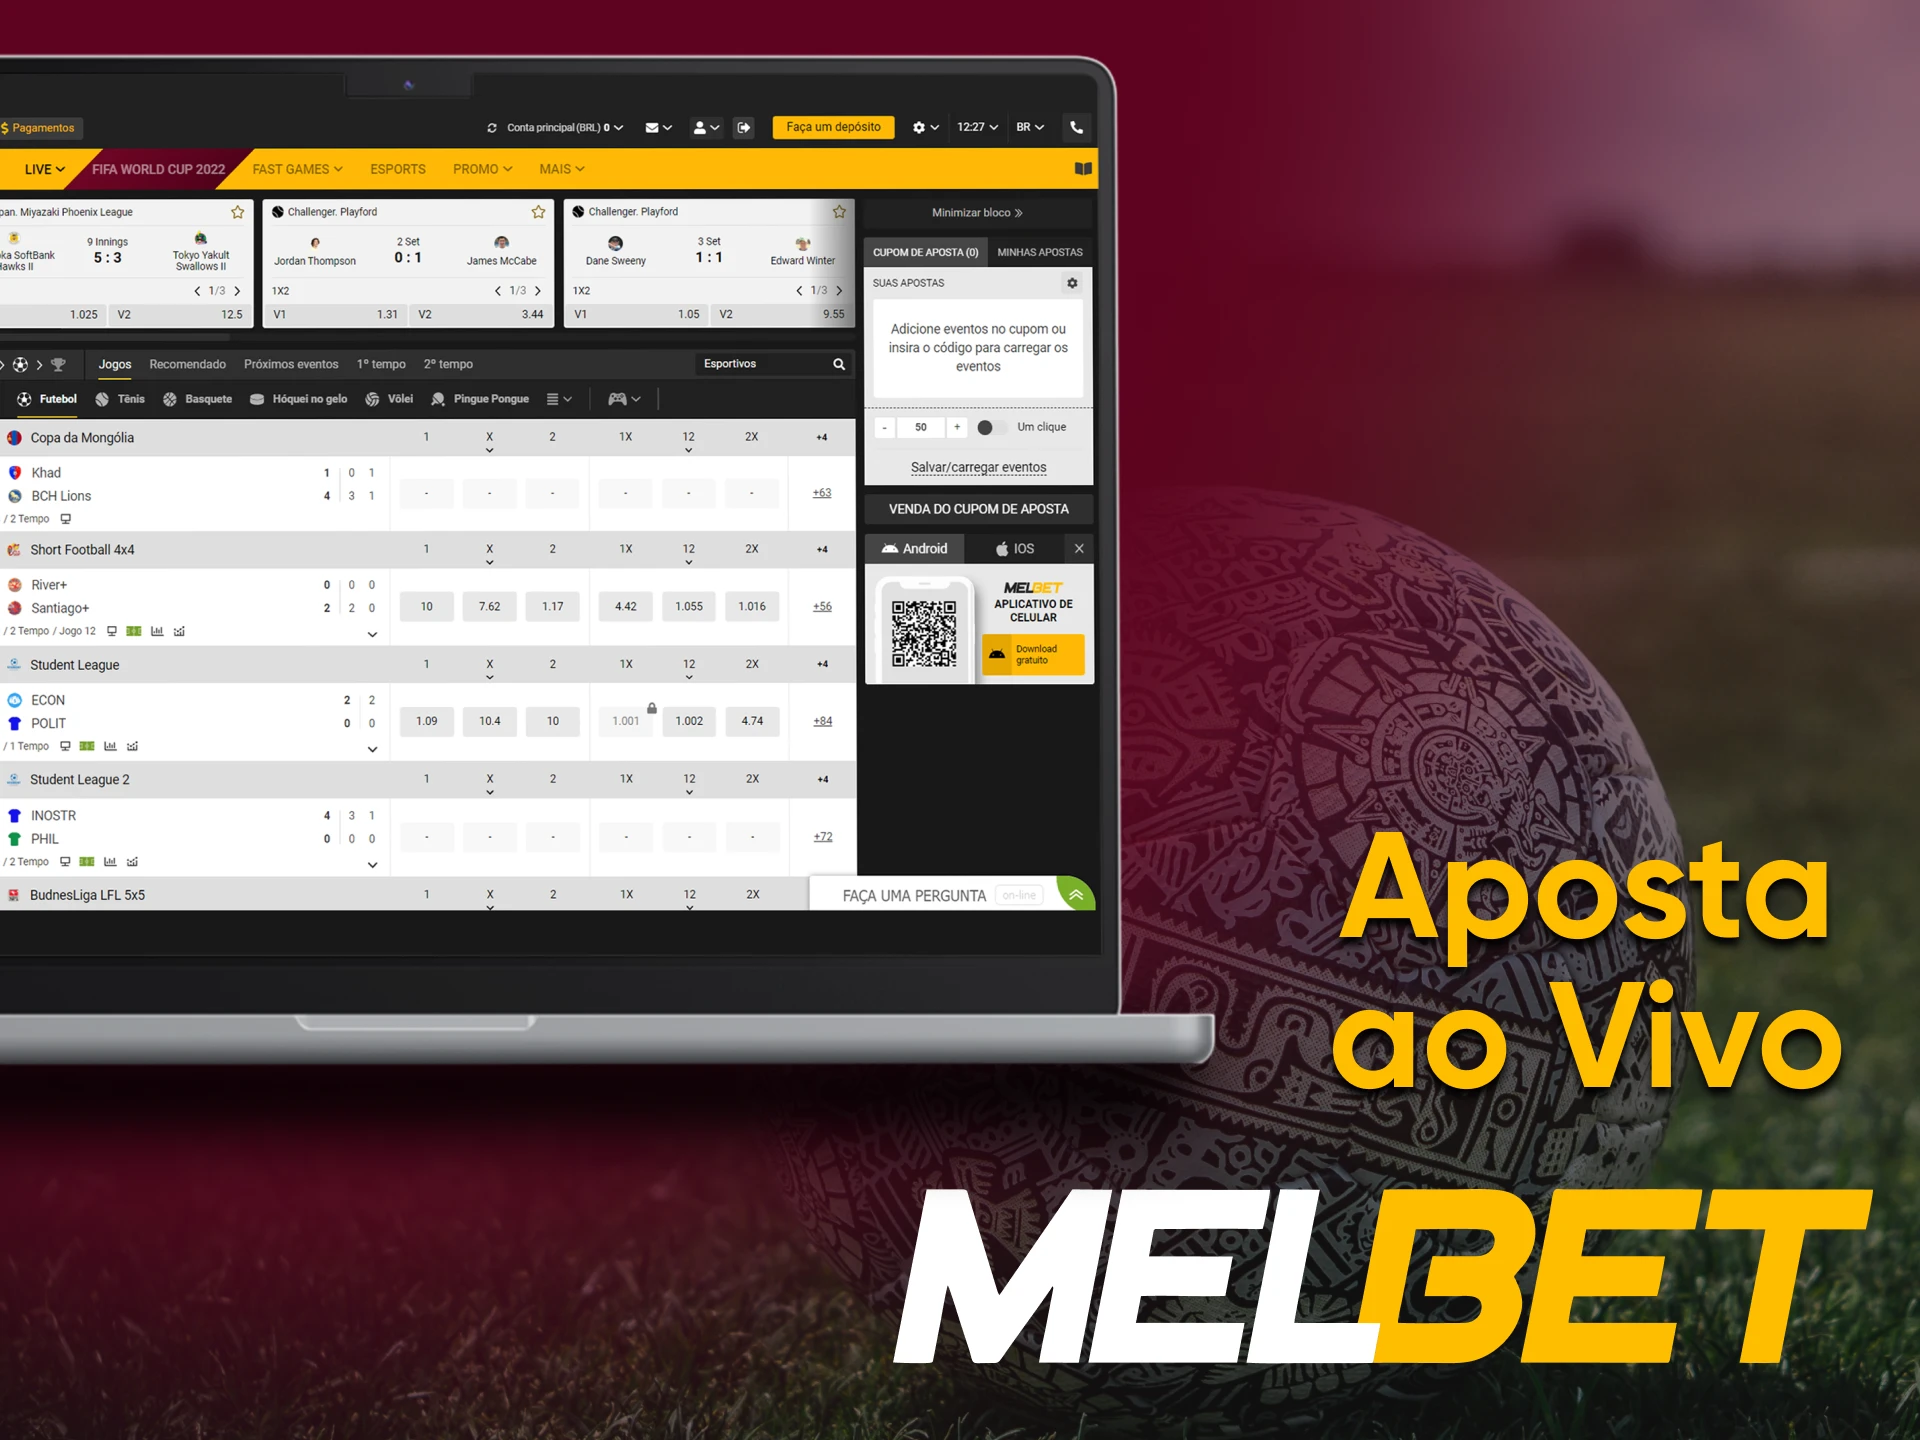 At Melbet, you can follow and bet on live games.